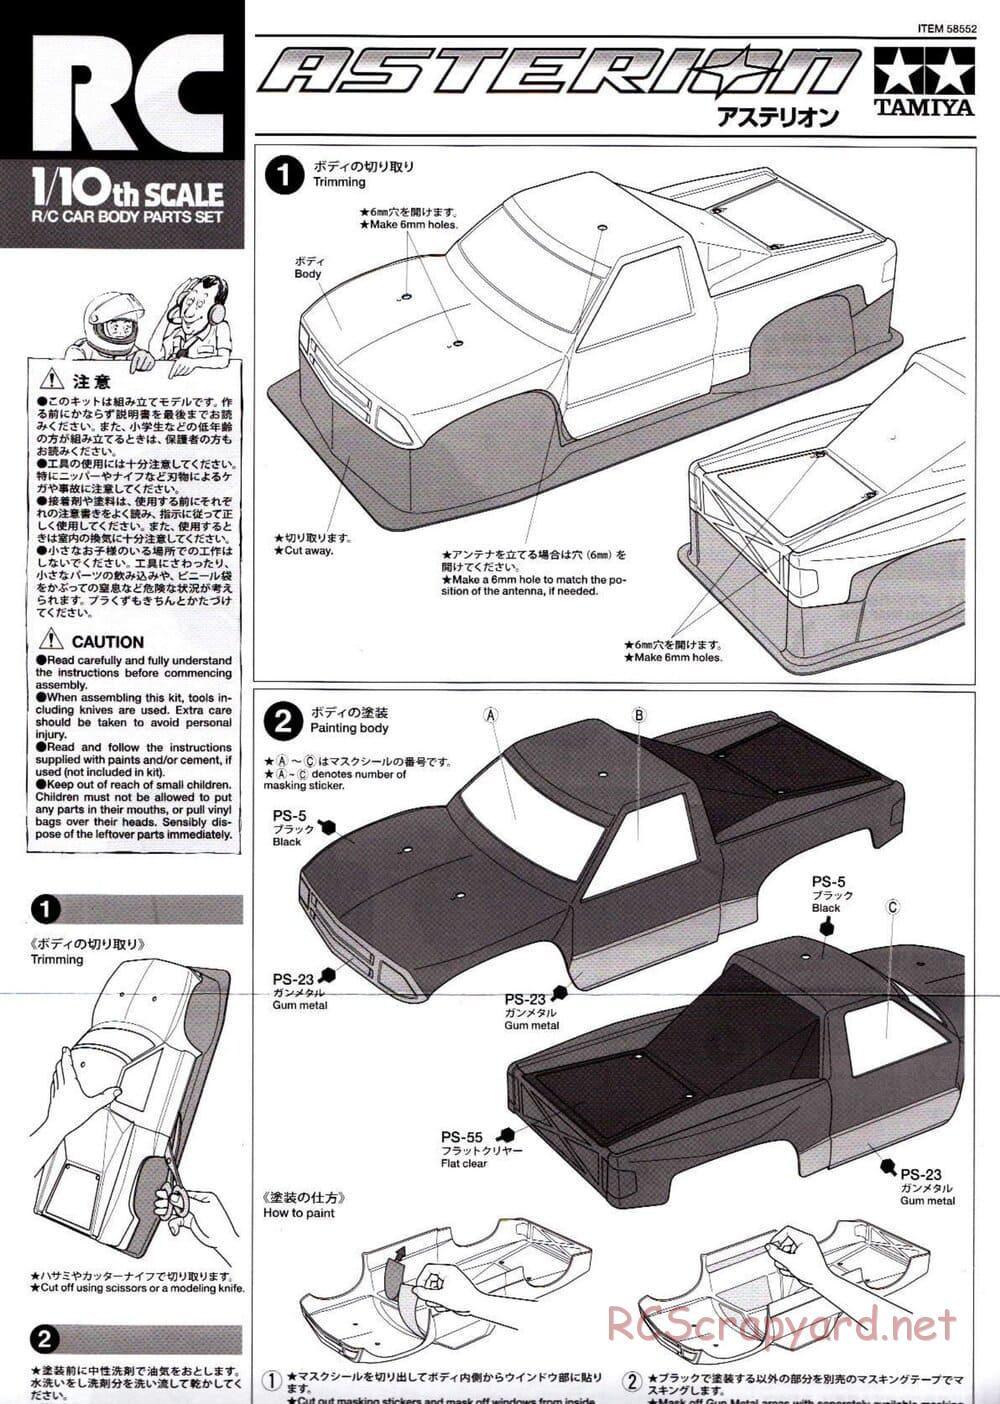 Tamiya - Asterion - XV-01T Chassis - Body Manual - Page 1